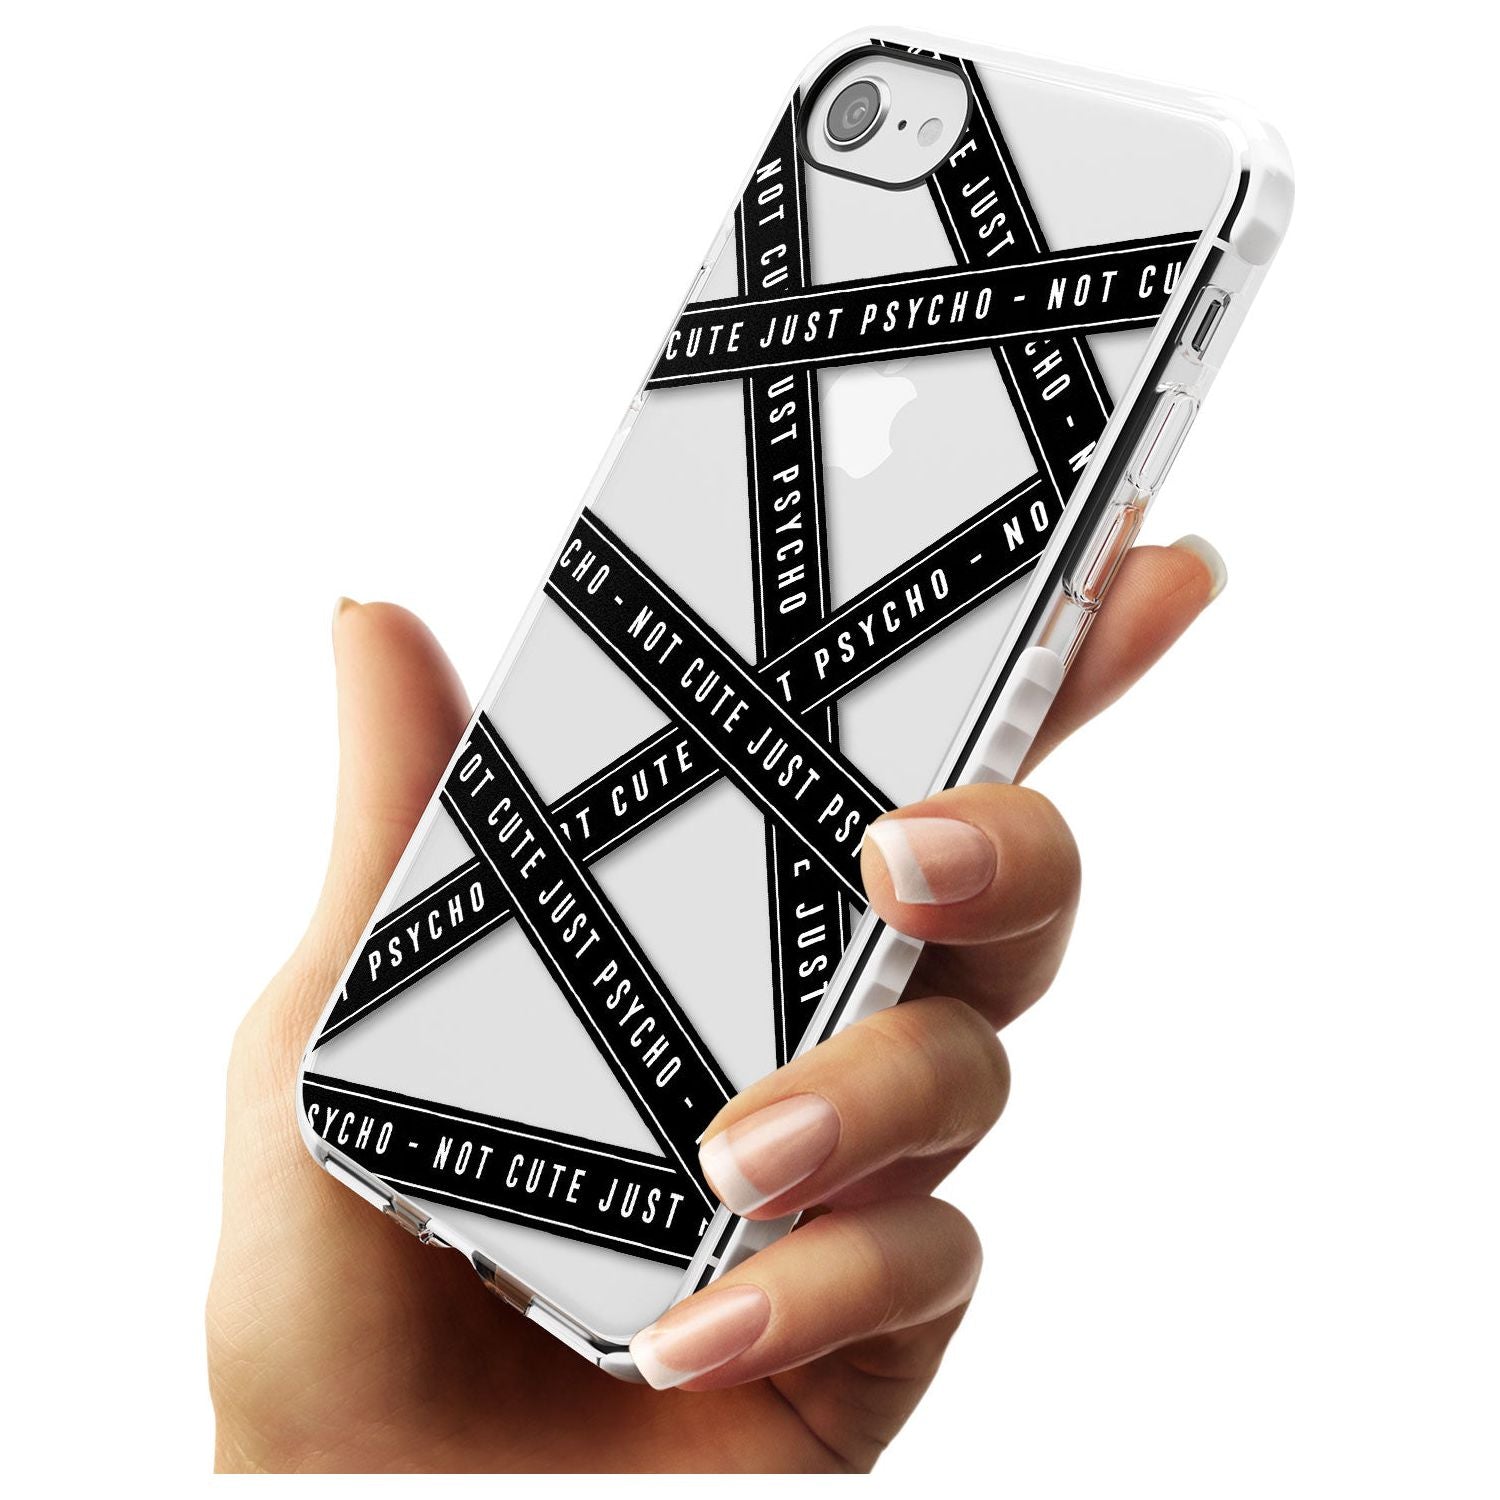 Caution Tape (Clear) Not Cute Just Psycho Impact Phone Case for iPhone SE 8 7 Plus